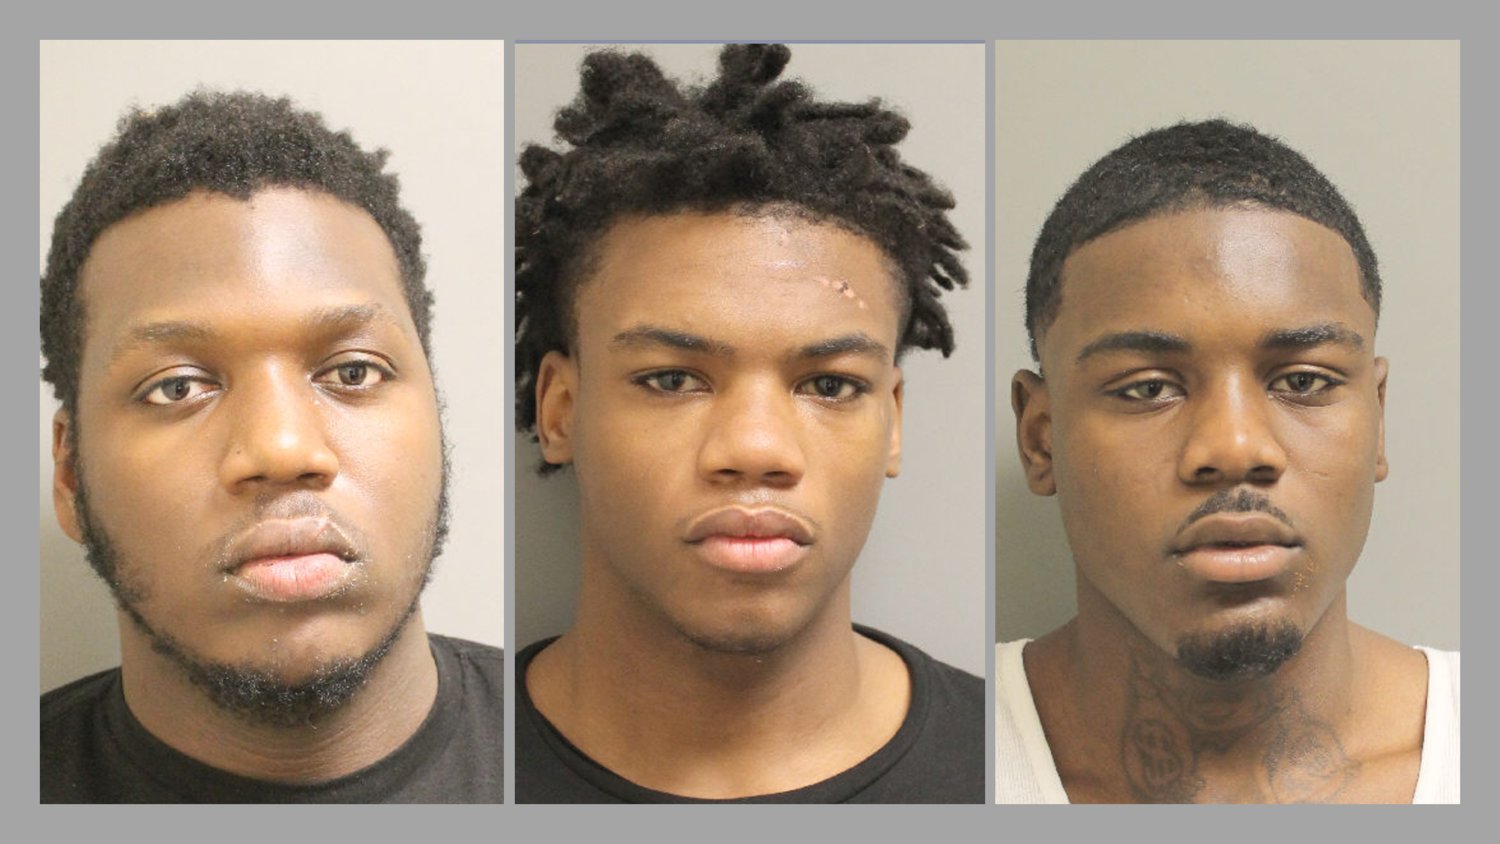 Suspects (from left to right) Datavian Lee McDonald, Christopher Calob Batiste and Jadarious Jaymond Polley as well as a 16-year-old accomplice were arrested Thursday morning. They are being charged with multiple crimes associated with the robbery of a Shipley Do-Nuts location near Katy Mills Mall.